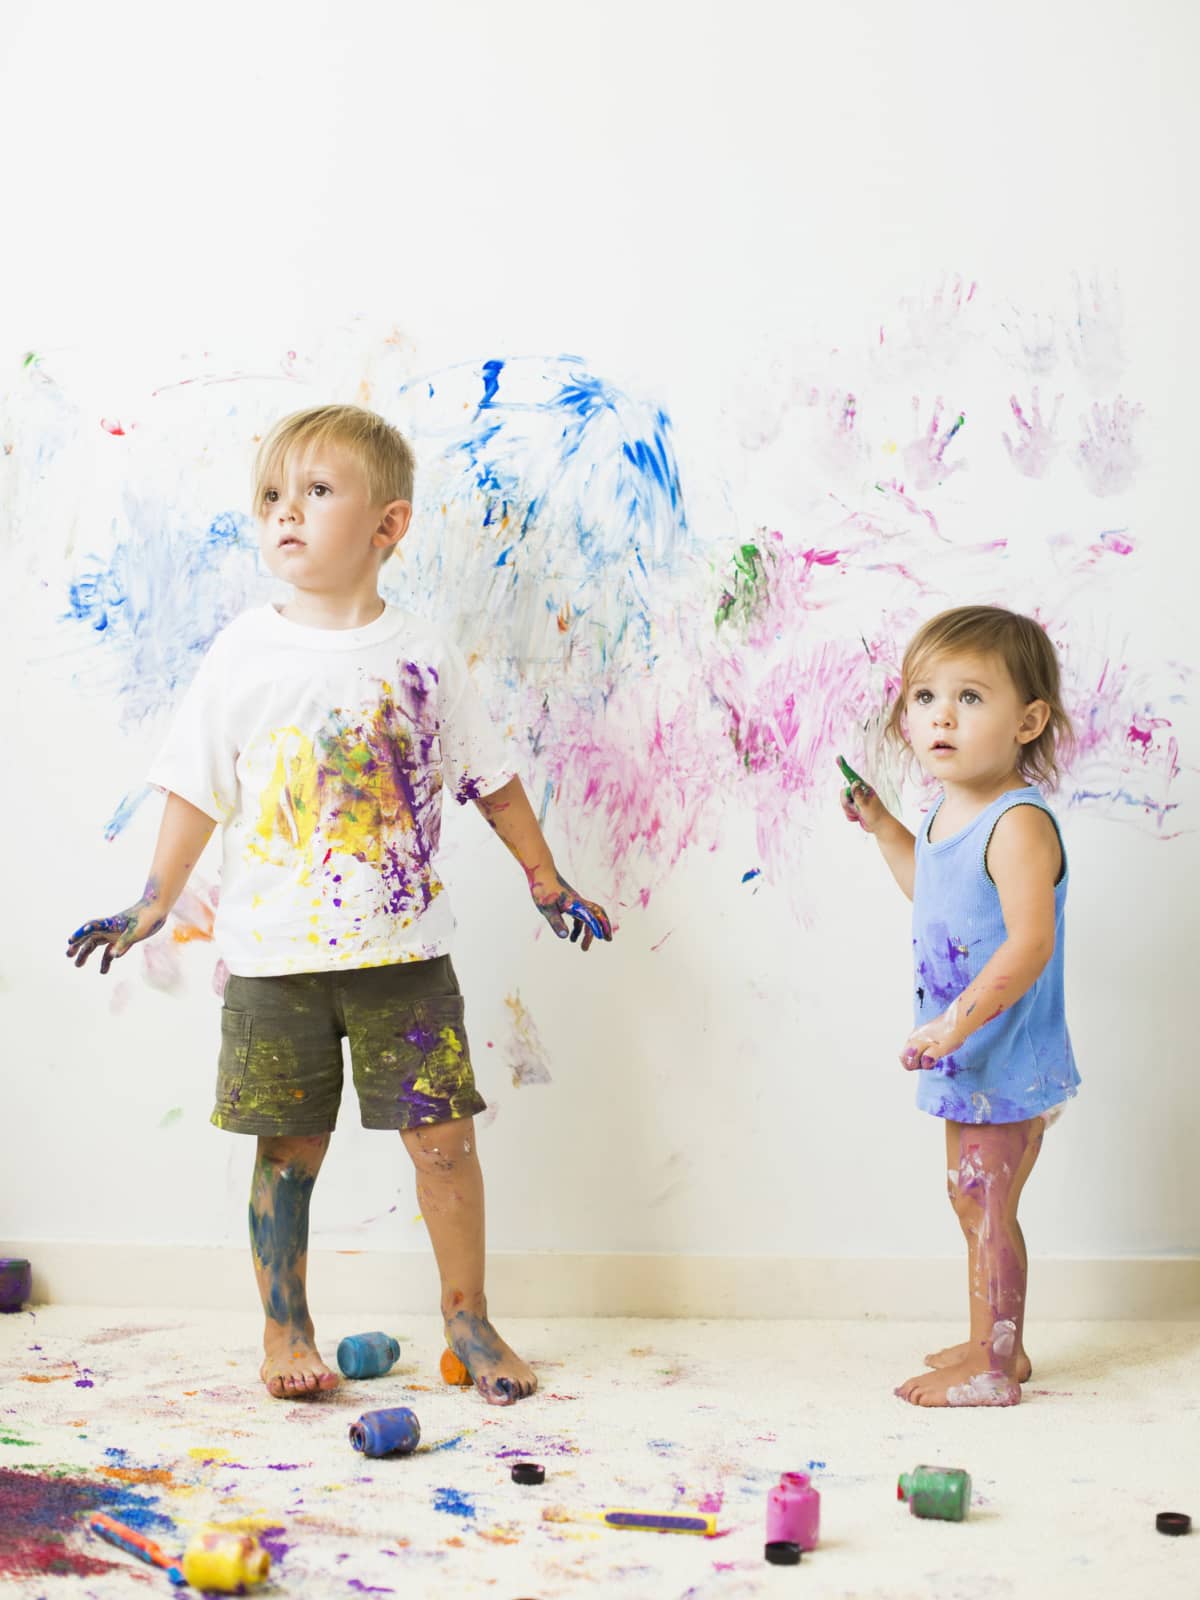 Paint-covered children painting on wall